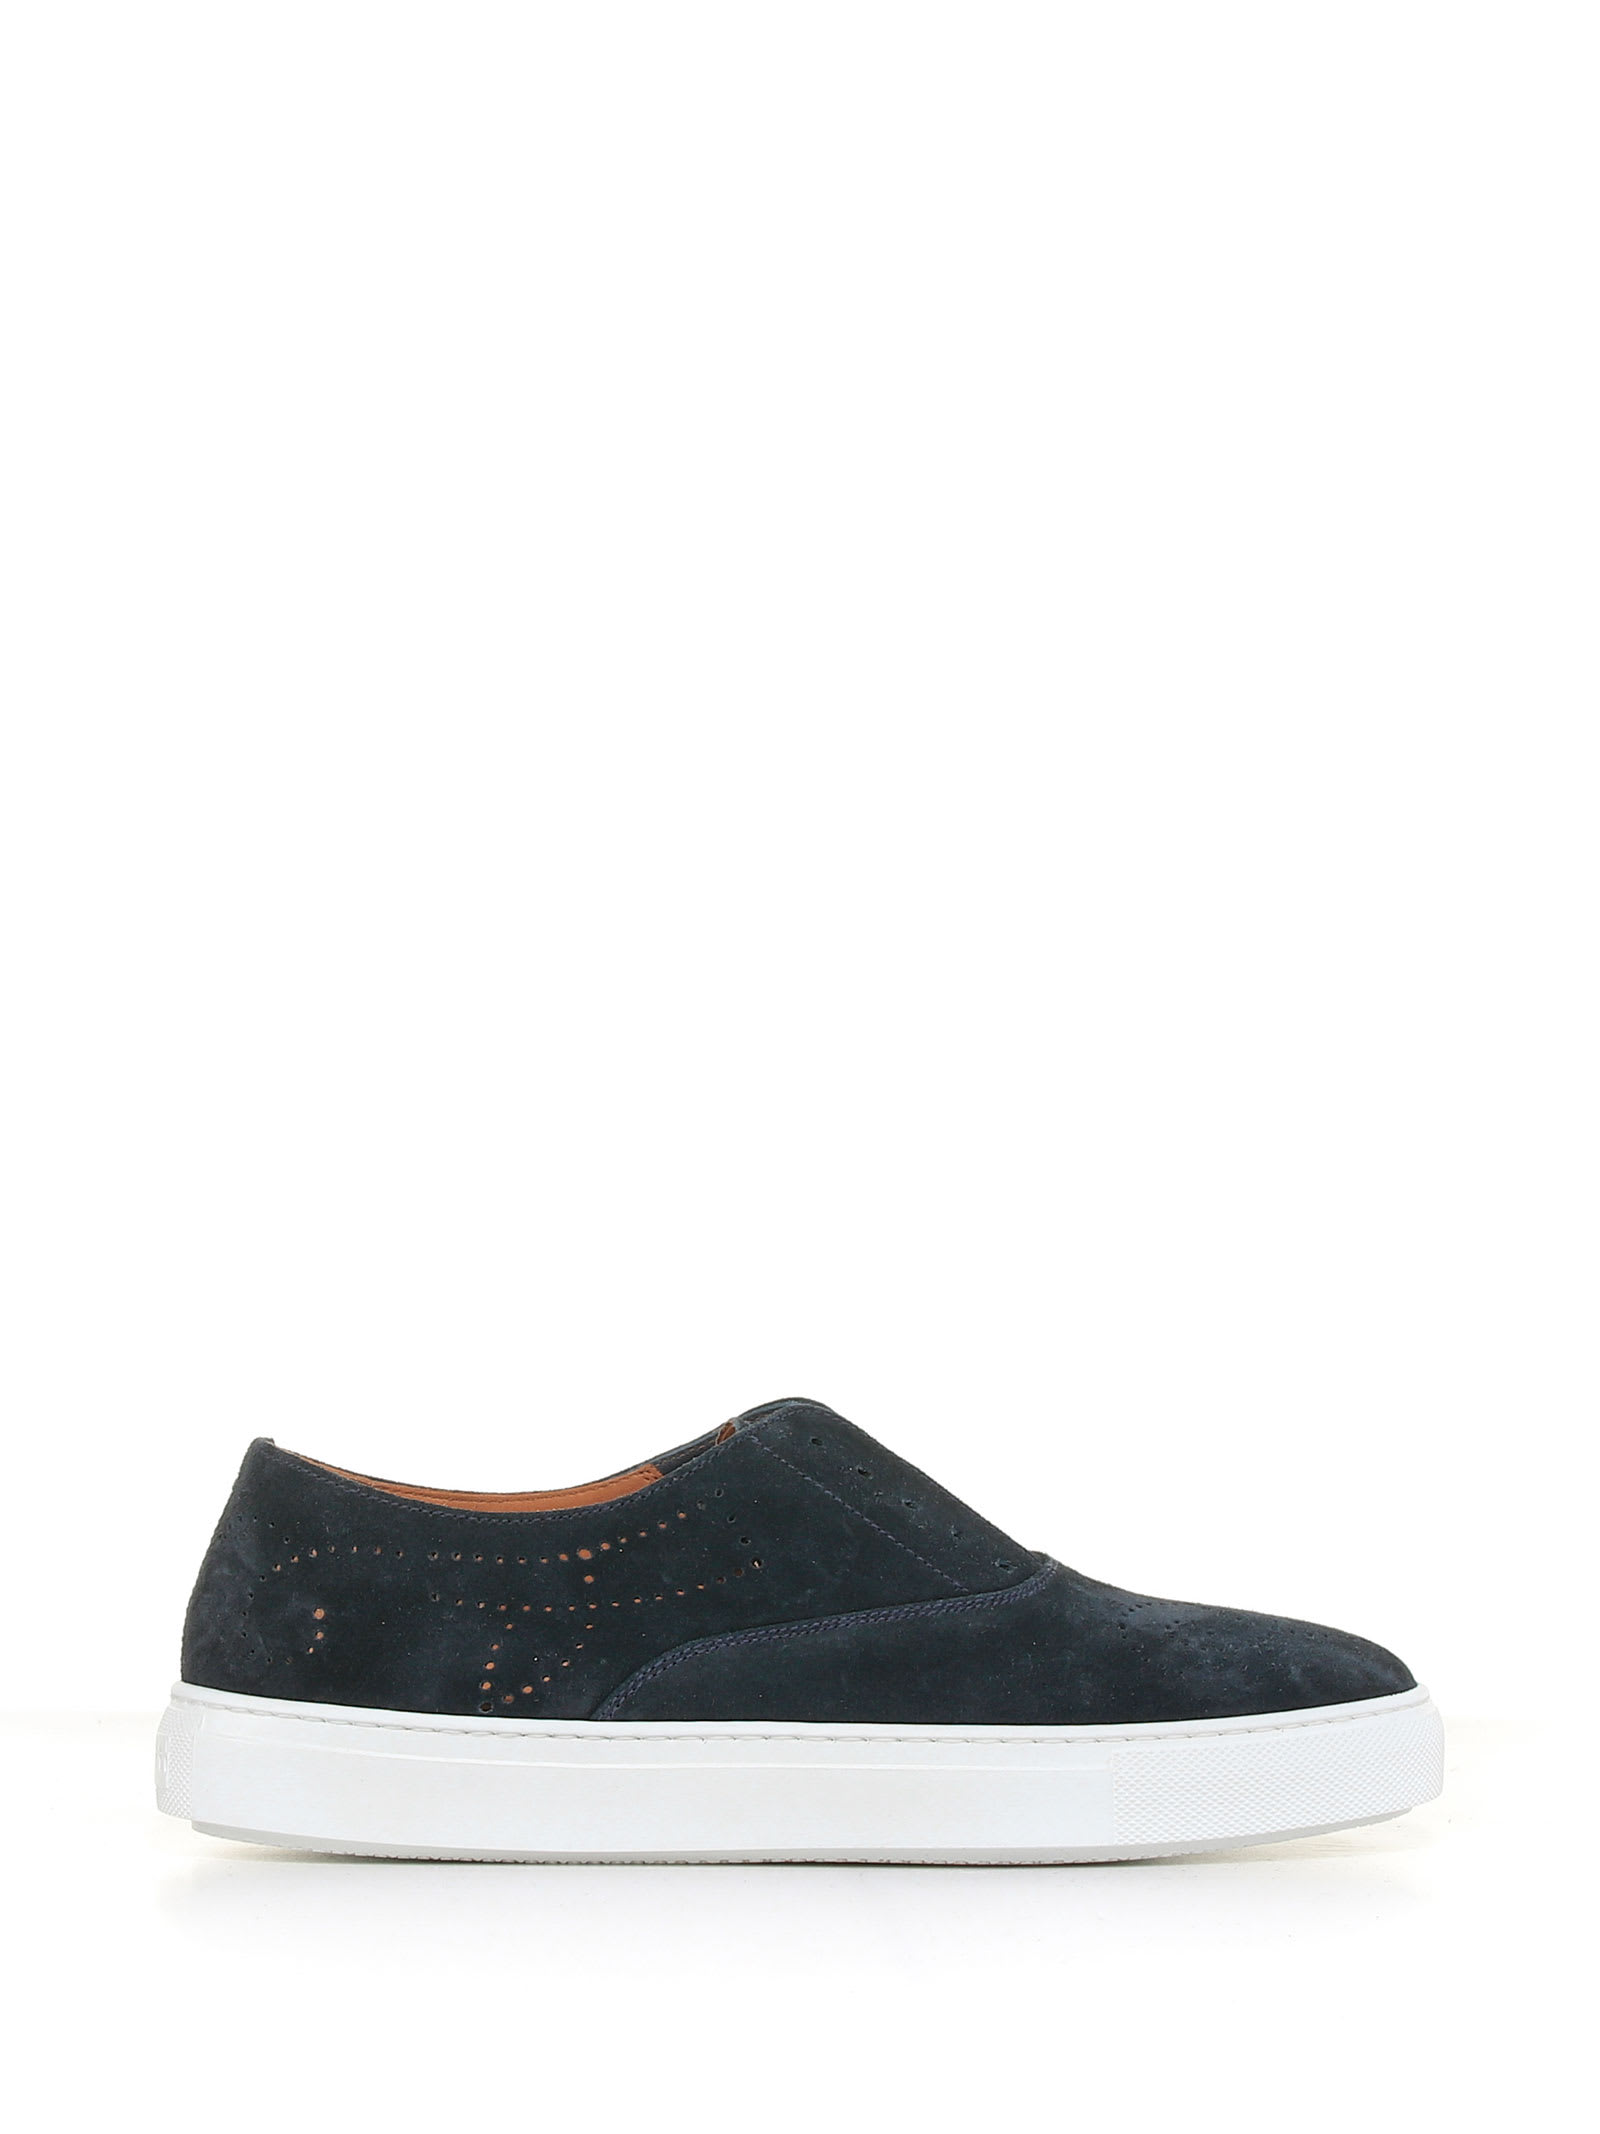 Fratelli Rossetti Slip On In Suede Leather